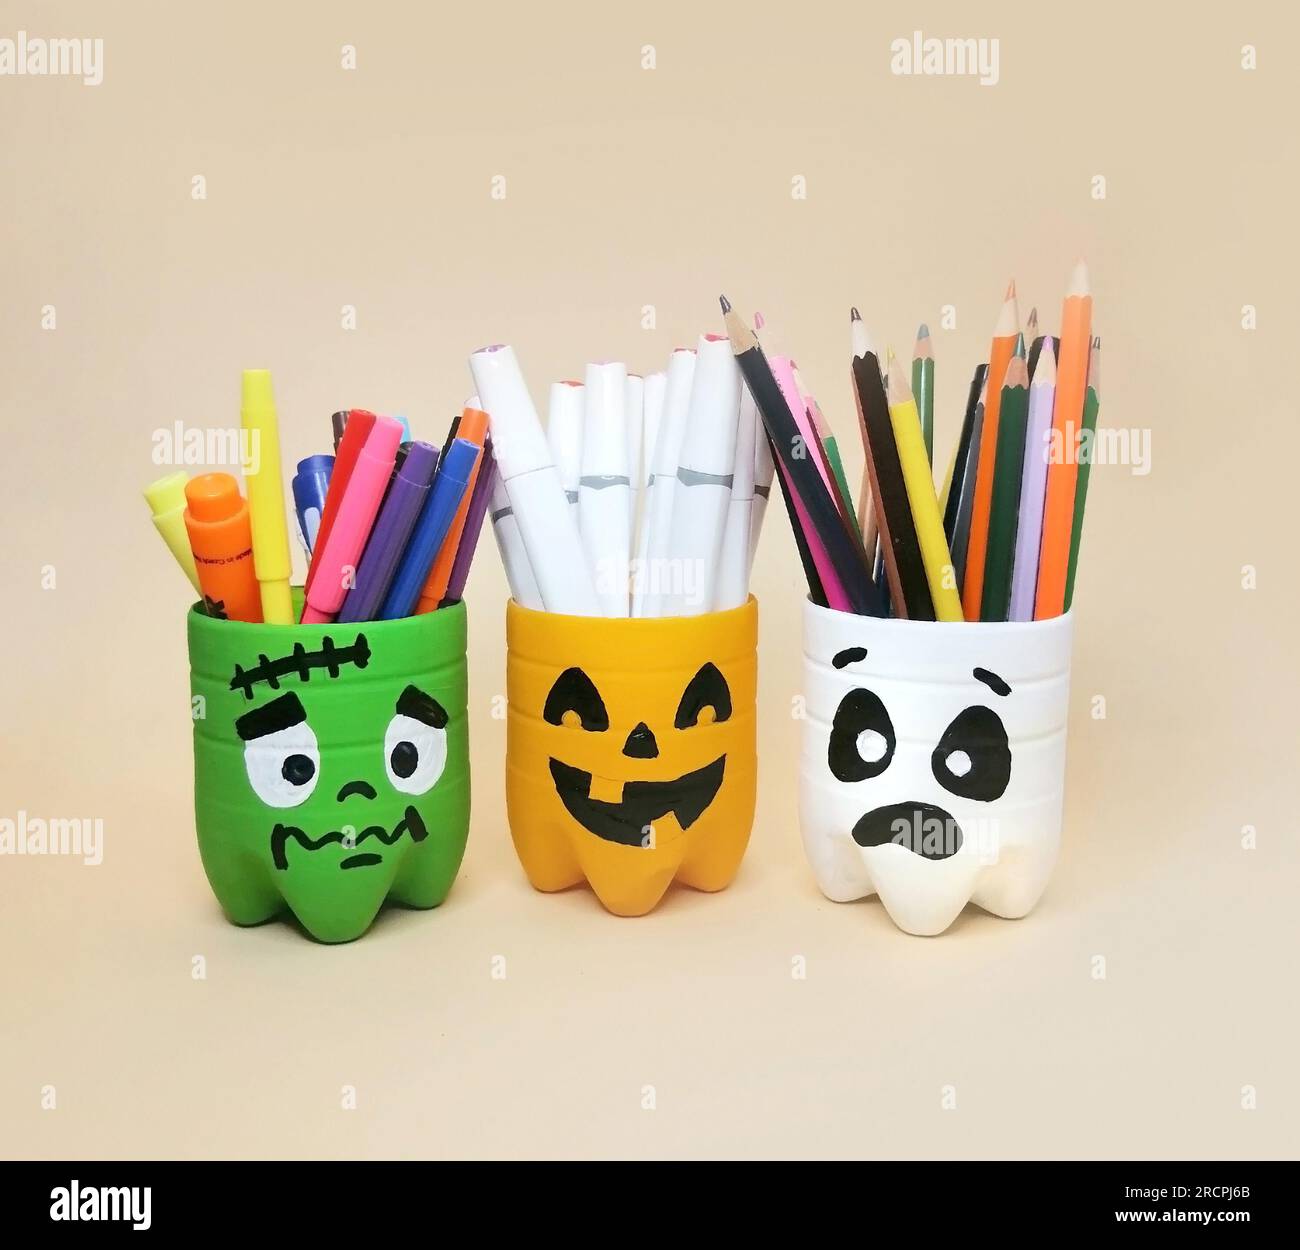 The art of handmade recycling from plastic bottle. Craft ideas of container for pencils. Crafts for the children's activity Stock Photo